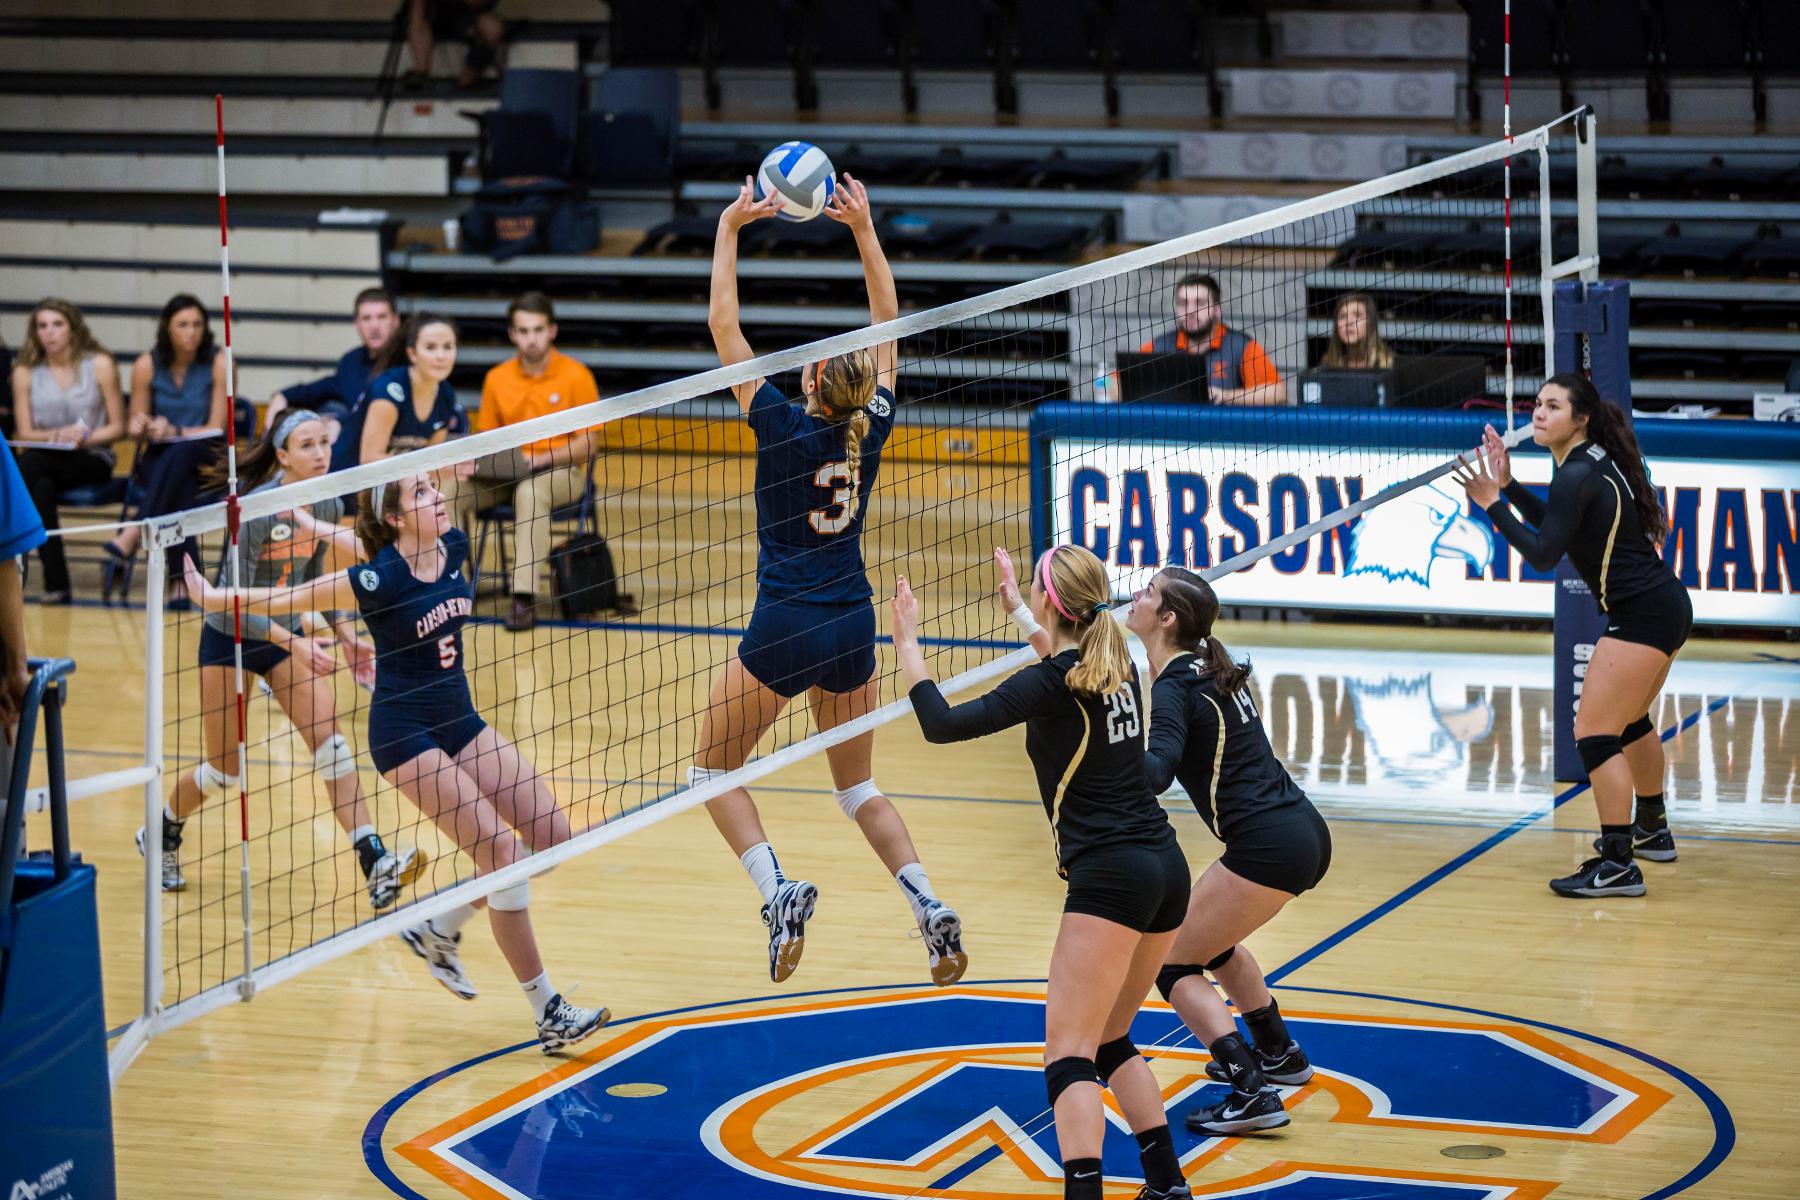 Late mistakes cost Eagles in four-set loss to Trojans